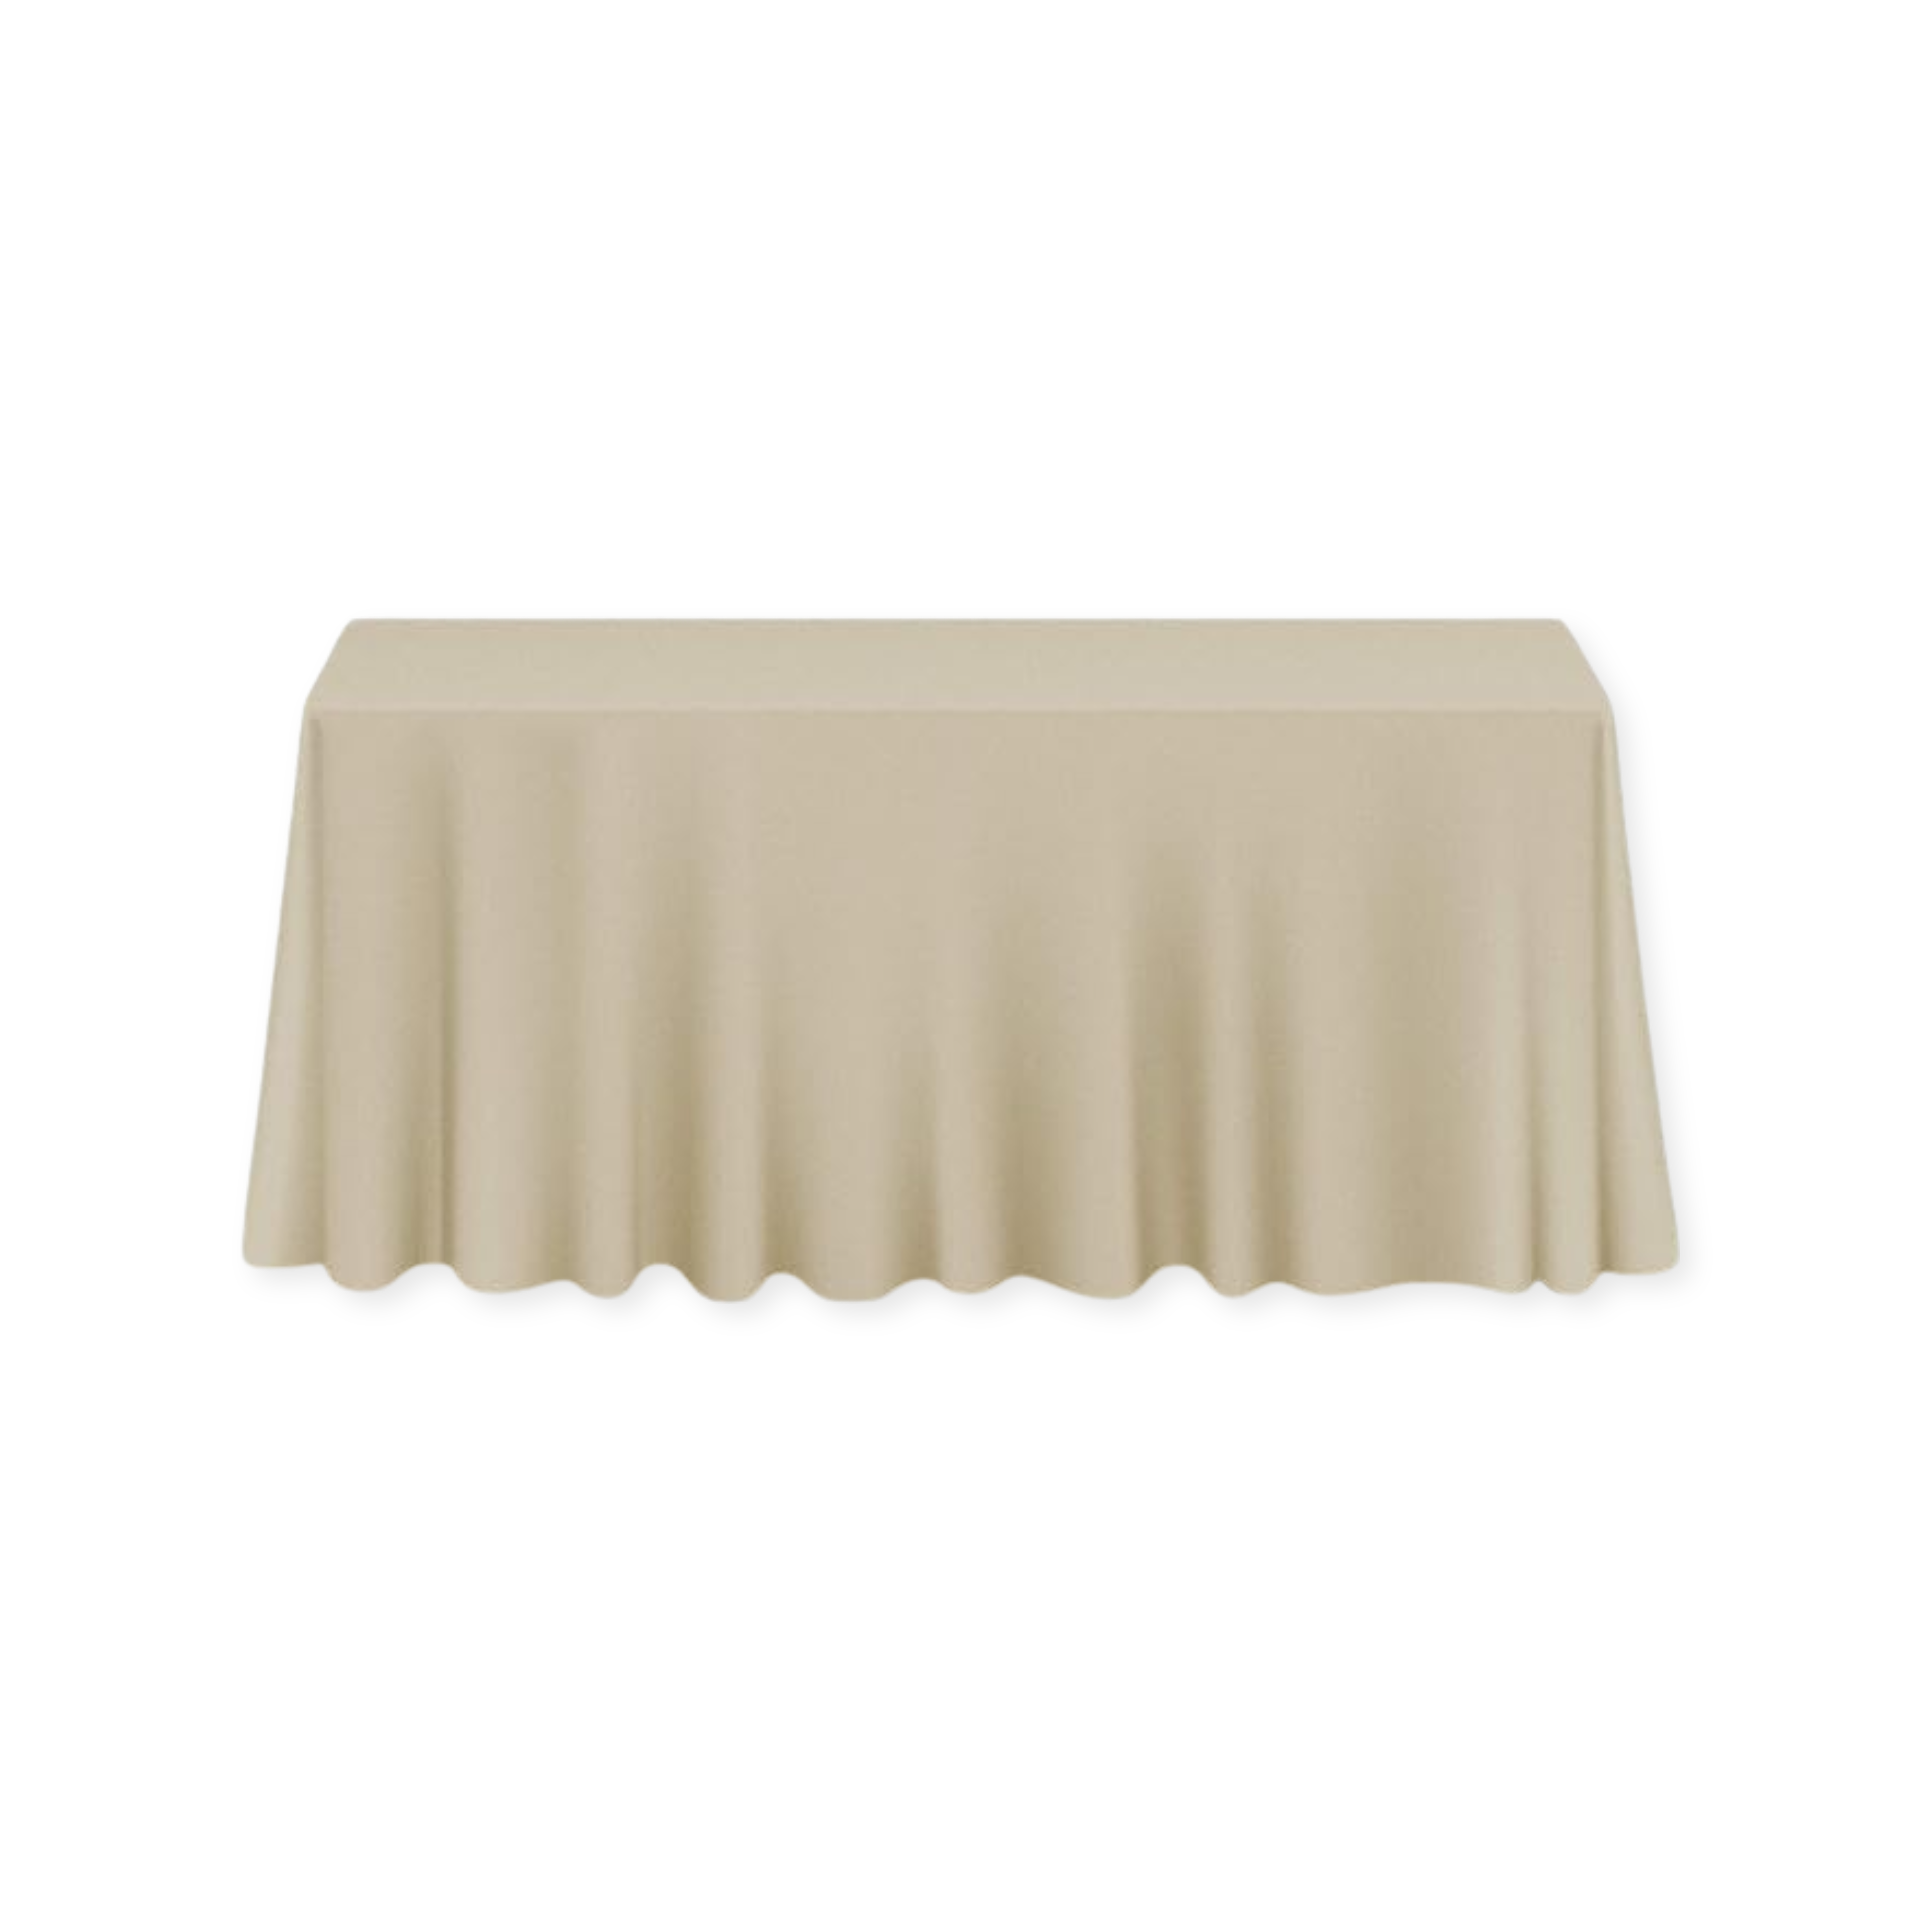 Tablecloth polyester rectangle sand commercial grade wedding party event rental panama city beach